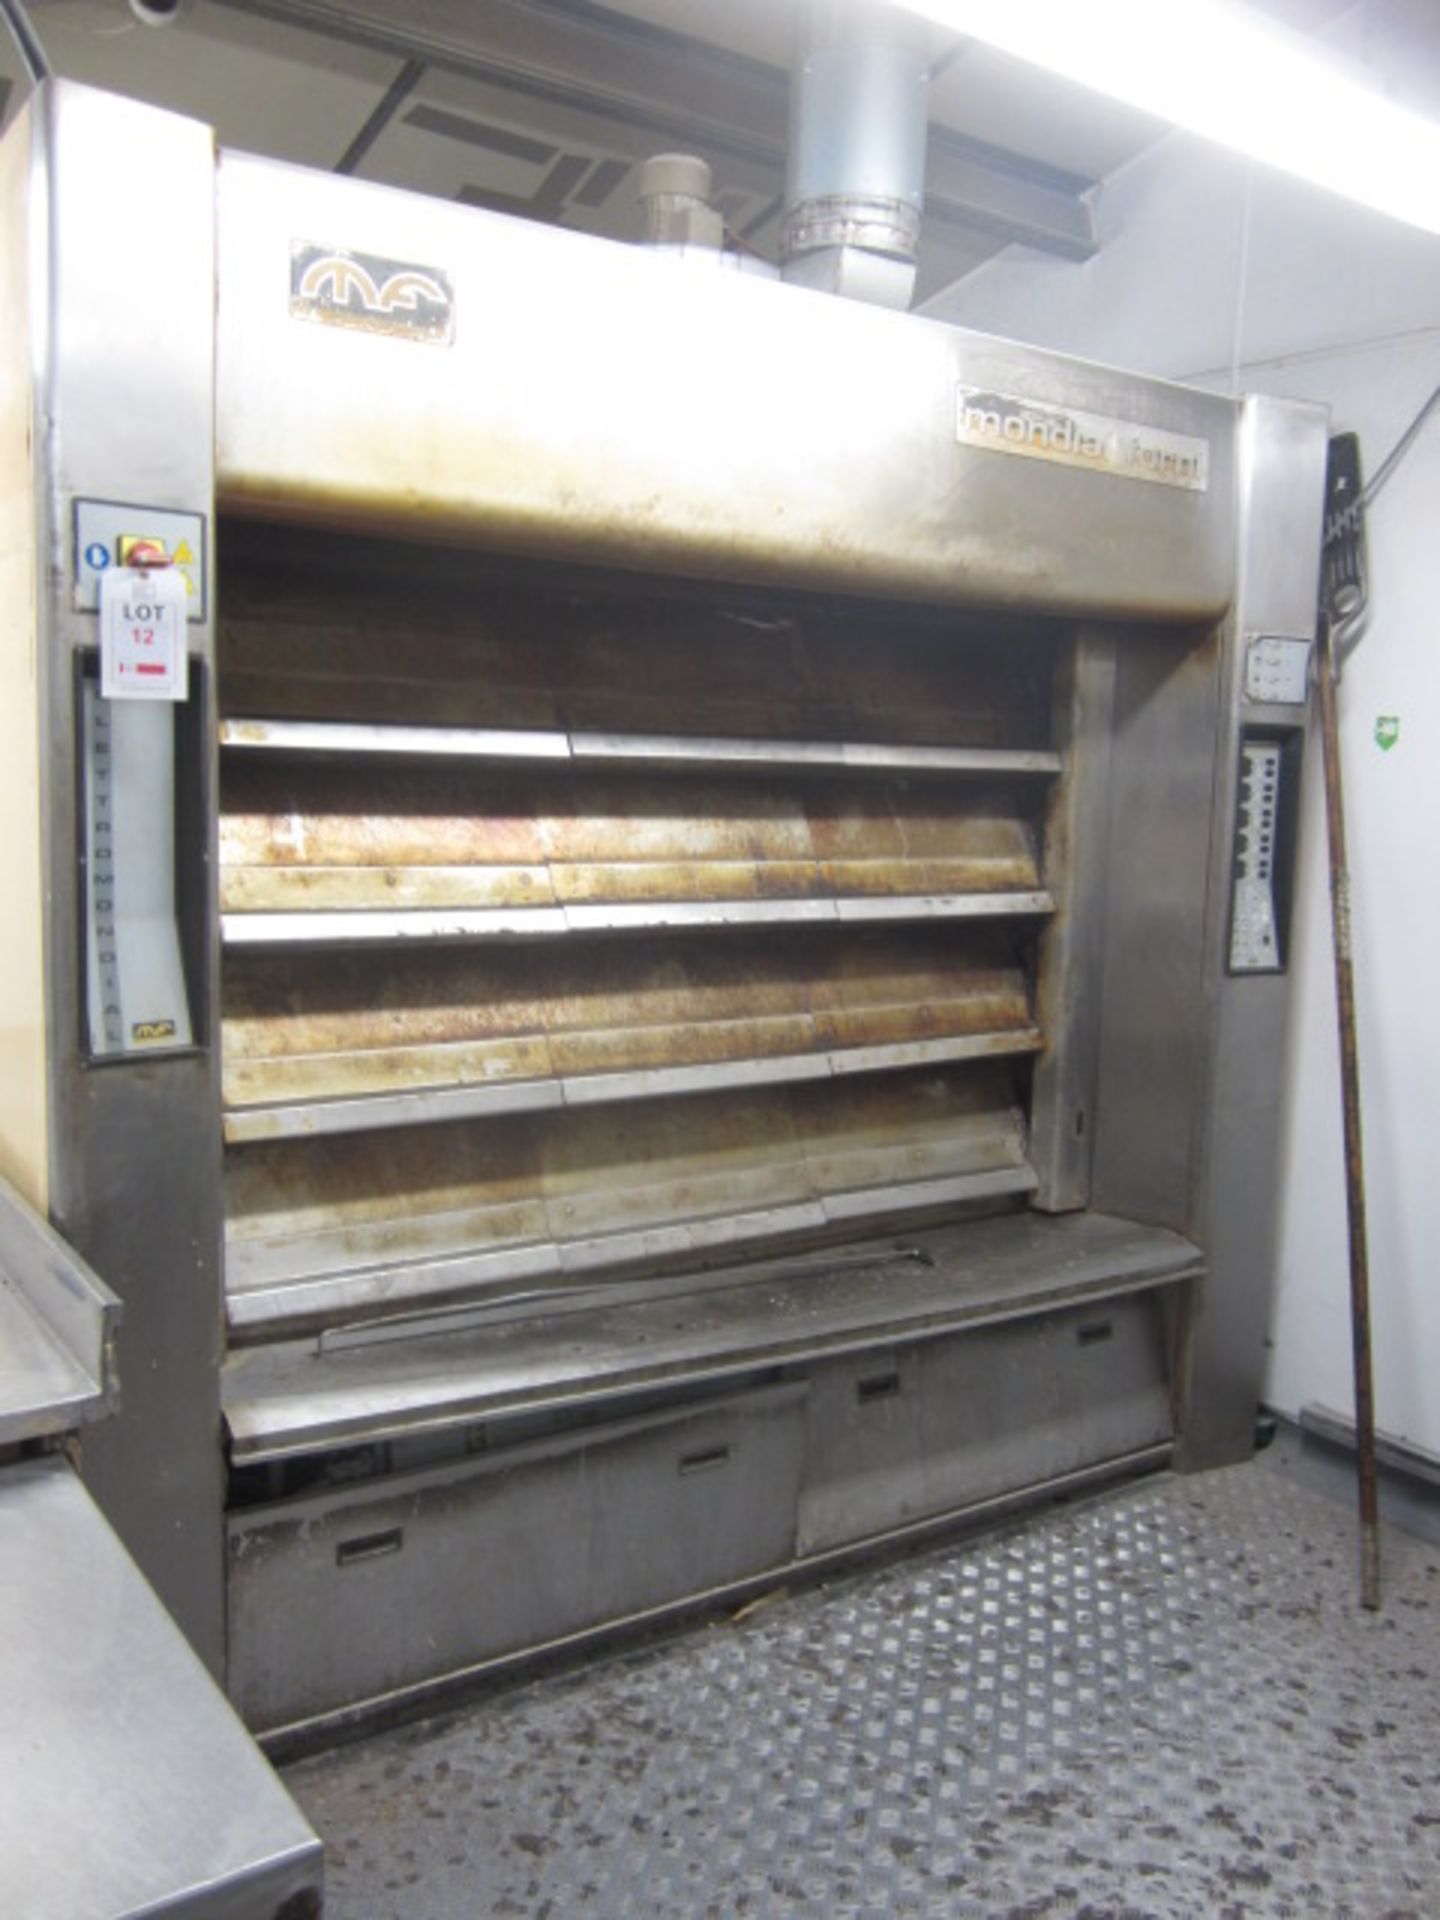 Benisi Mondial Forni stainless steel 4-deck electric oven Deck width approx. 1800mm Mondial Forni - Image 9 of 10